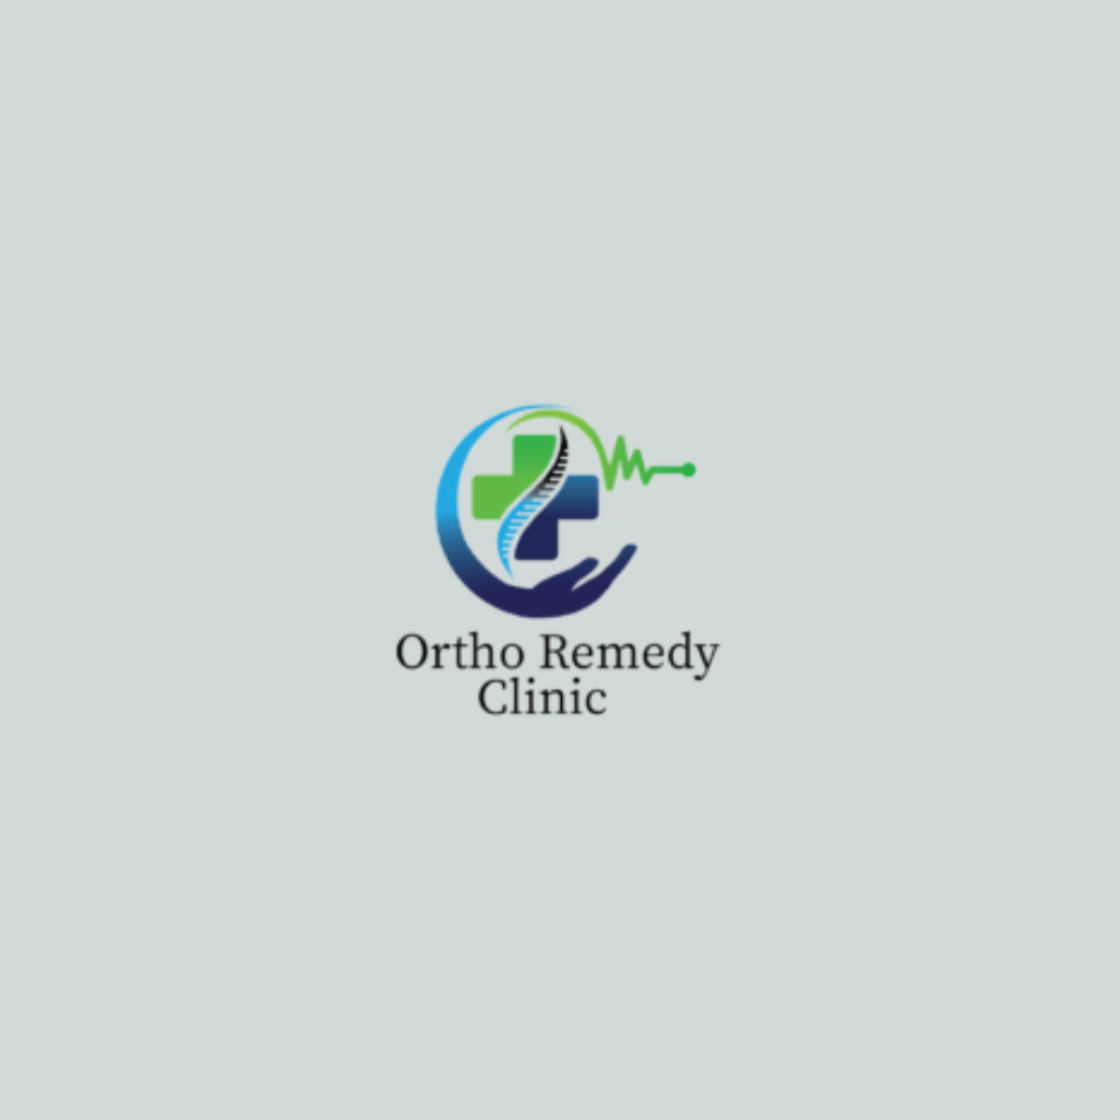 Ortho Remedy Clinic